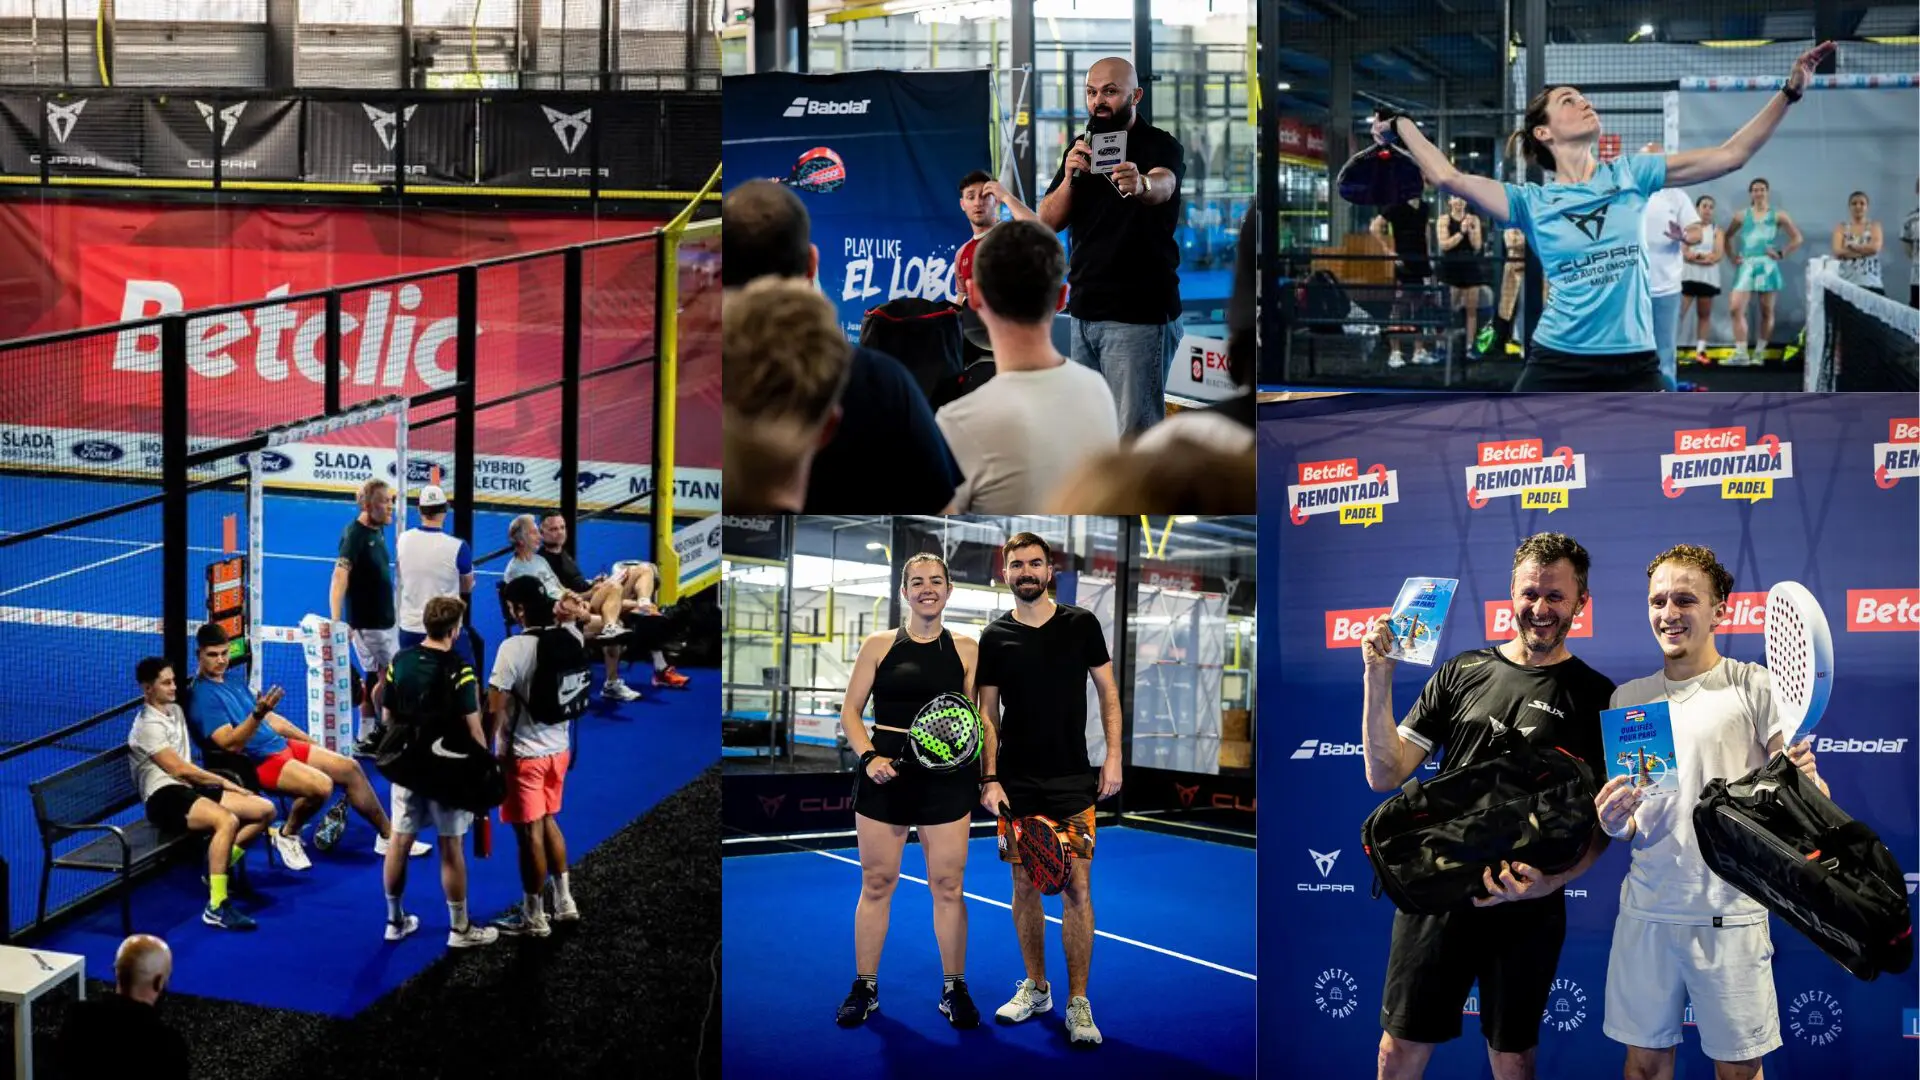 Betclic Remontada: stage 4Padel Toulouse-Colomiers distributes the last tickets for Paris